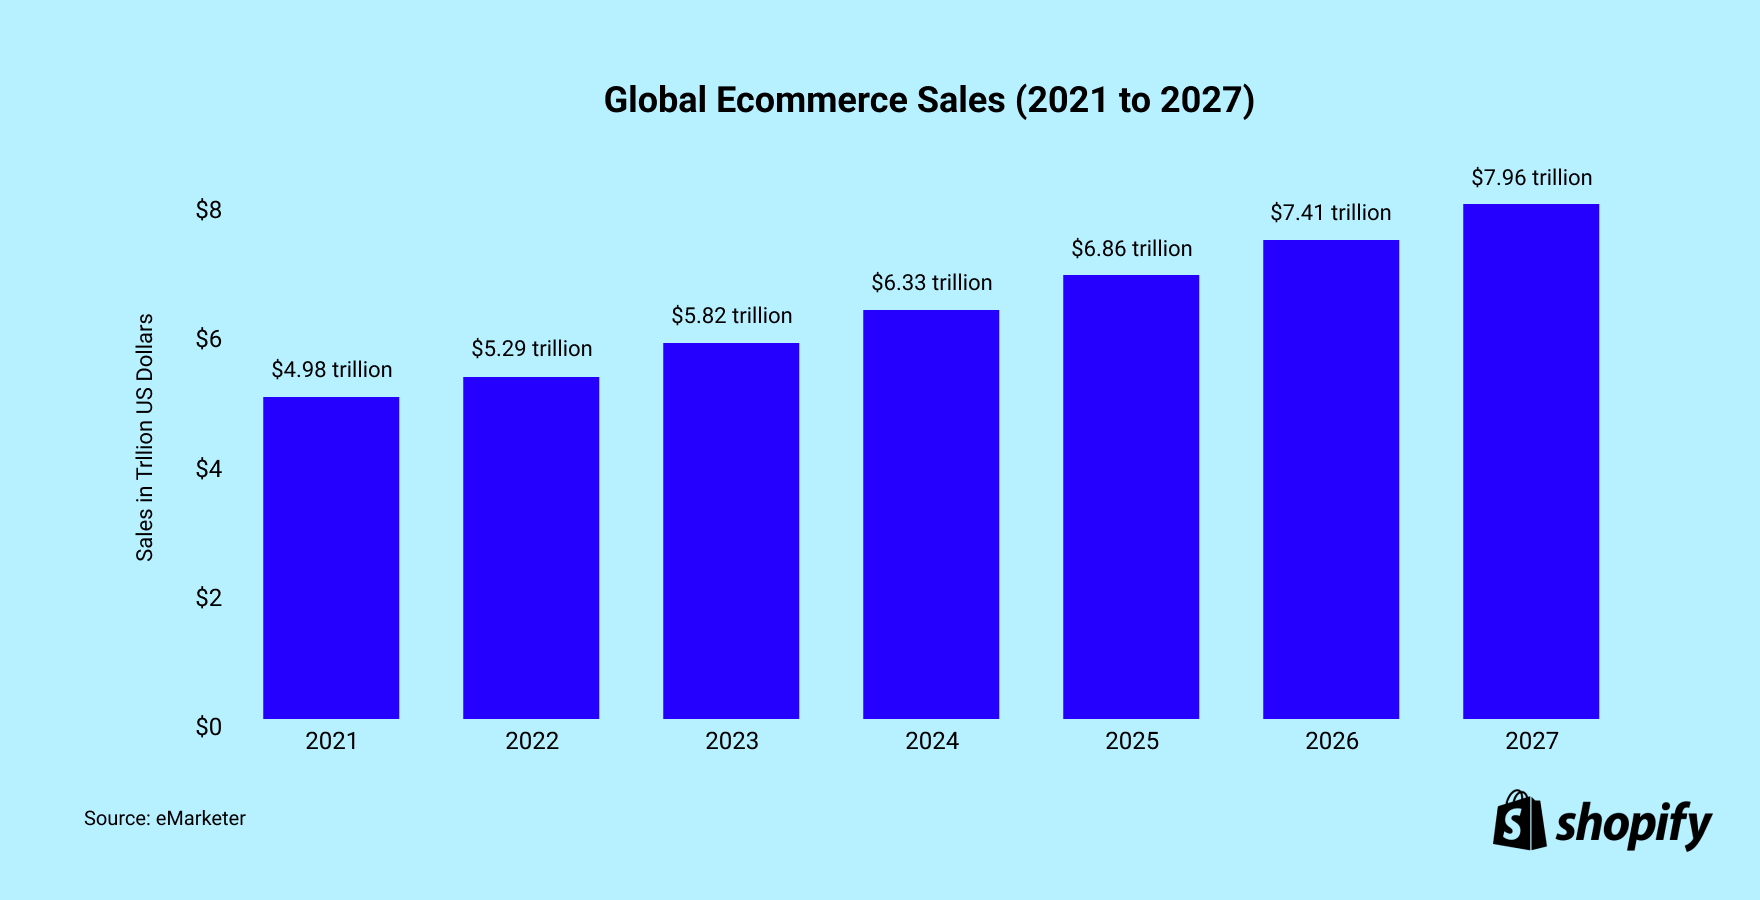 Chart of Global Ecommerce Sales from 2021 to 2027